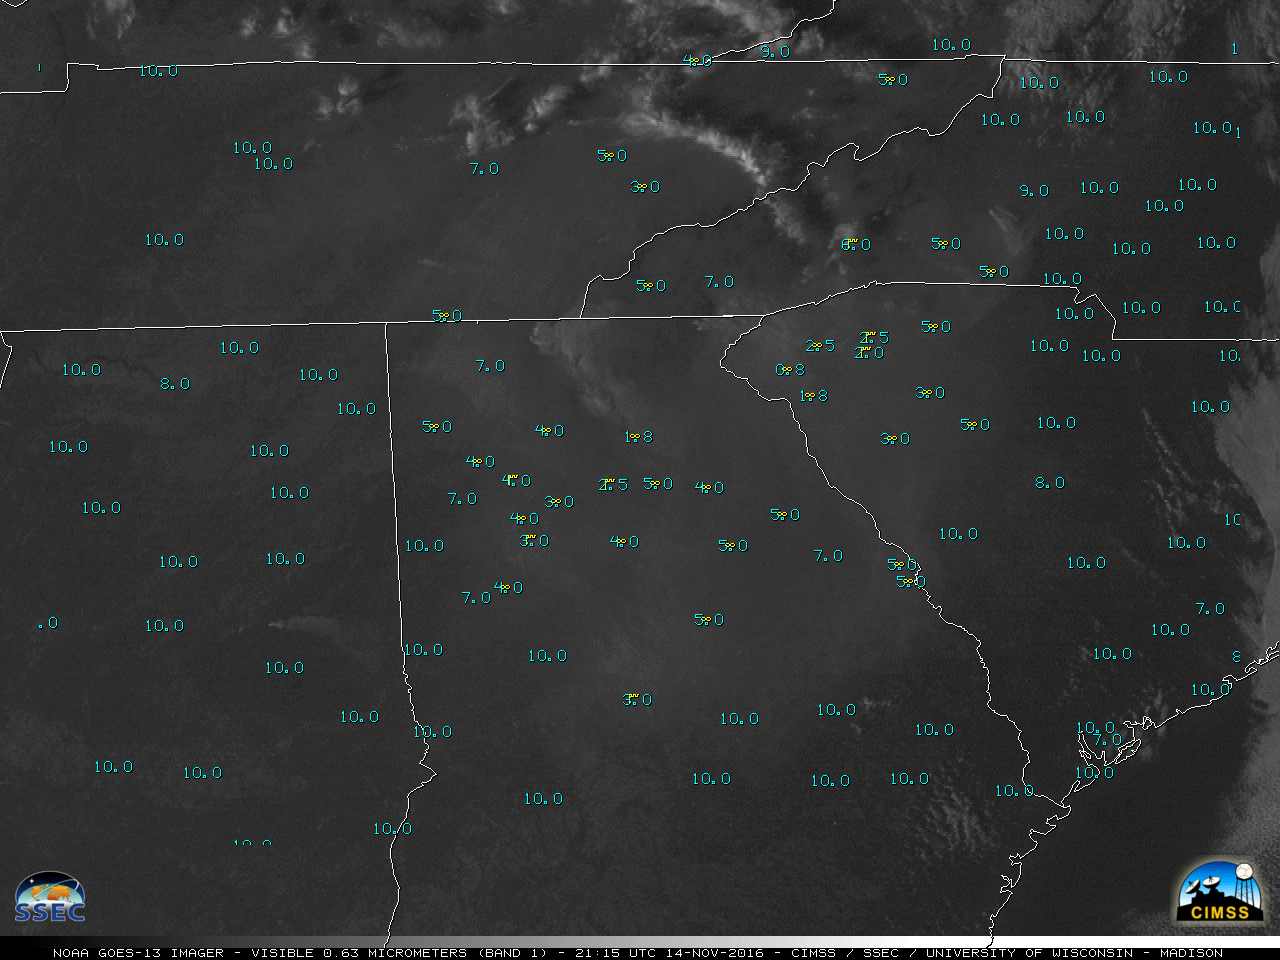 GOES-13 Visible (0.63 µm) images, with hourly plots of surface weather (yellow) and visibility (statute miles, in cyan) [click to animate]